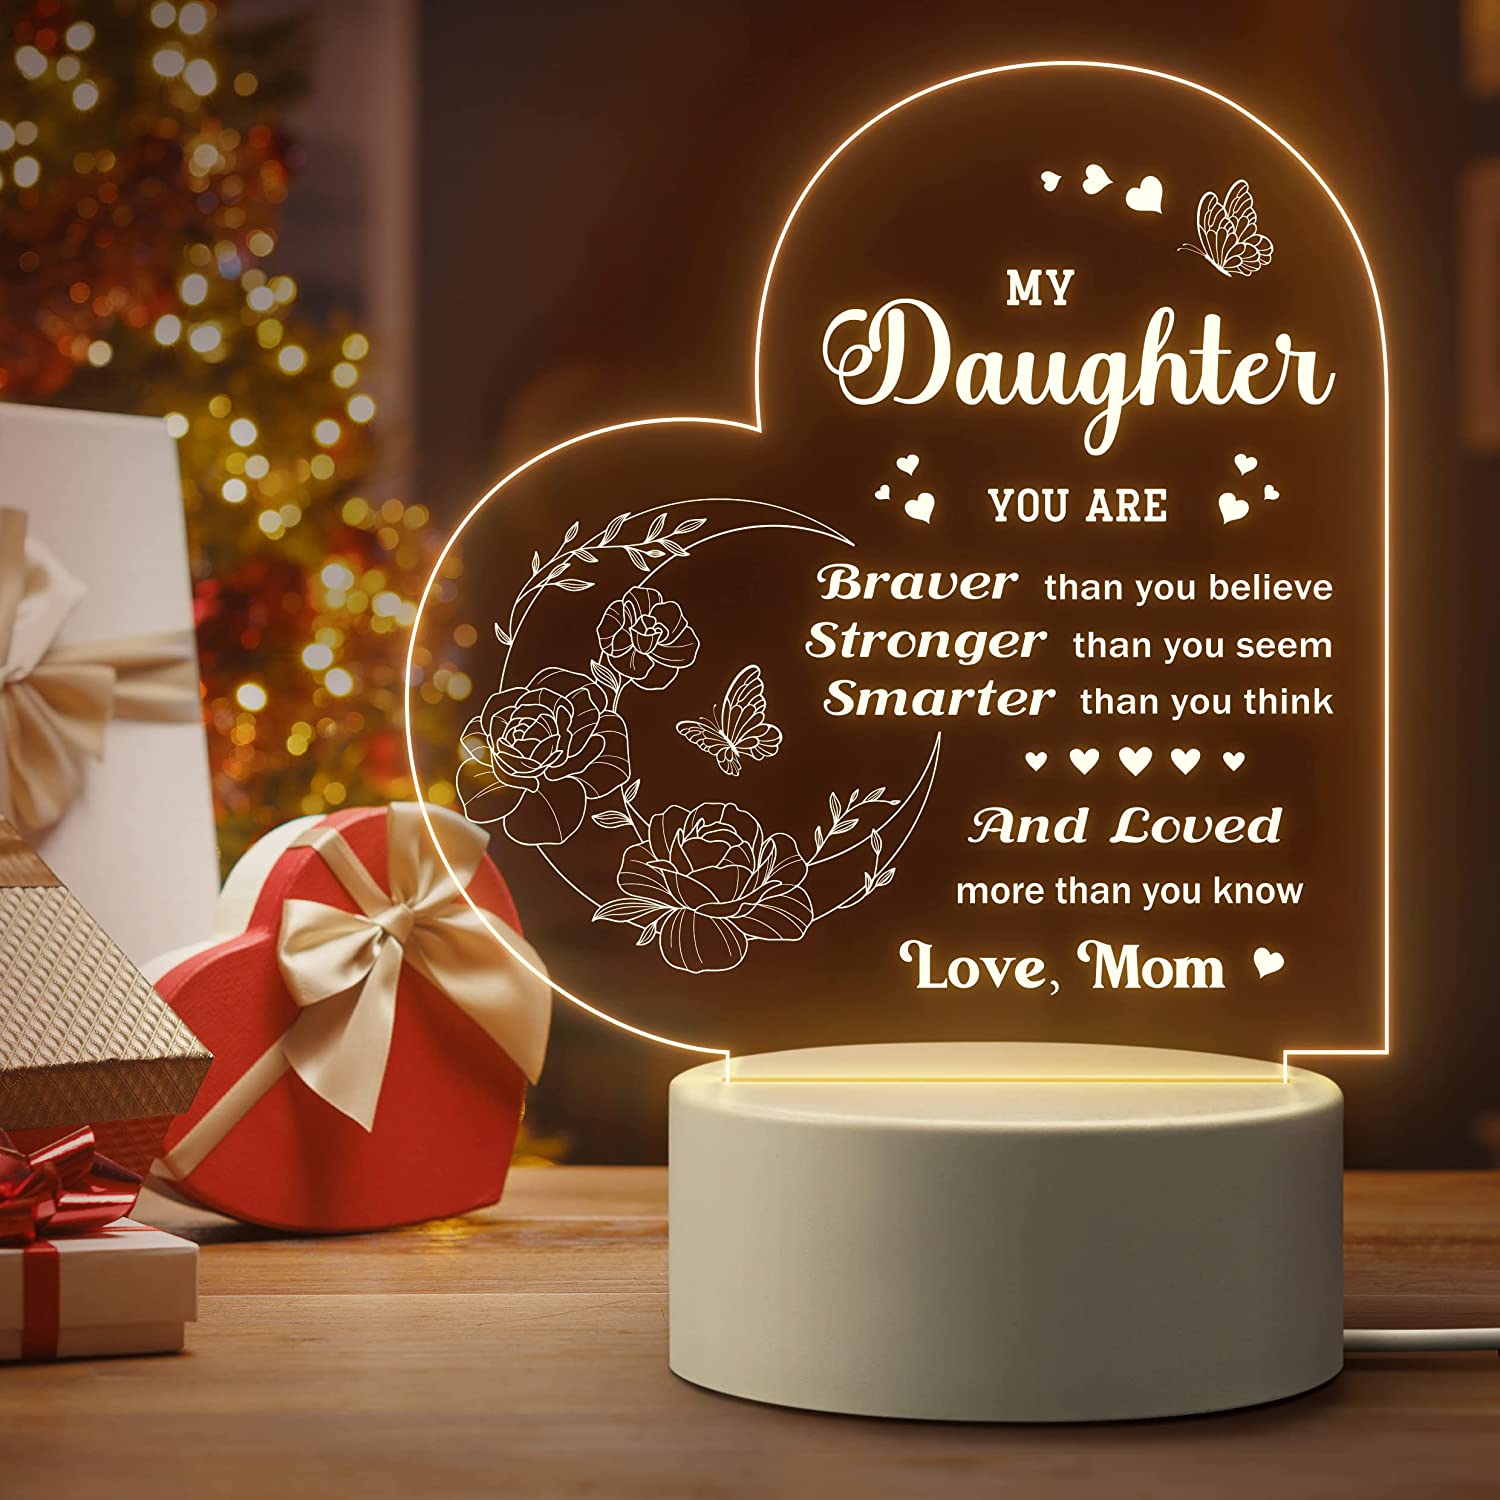 Meaningful gift ideas for mom, Birthday gift ideas for mom from daught –  Fullmoon Gift